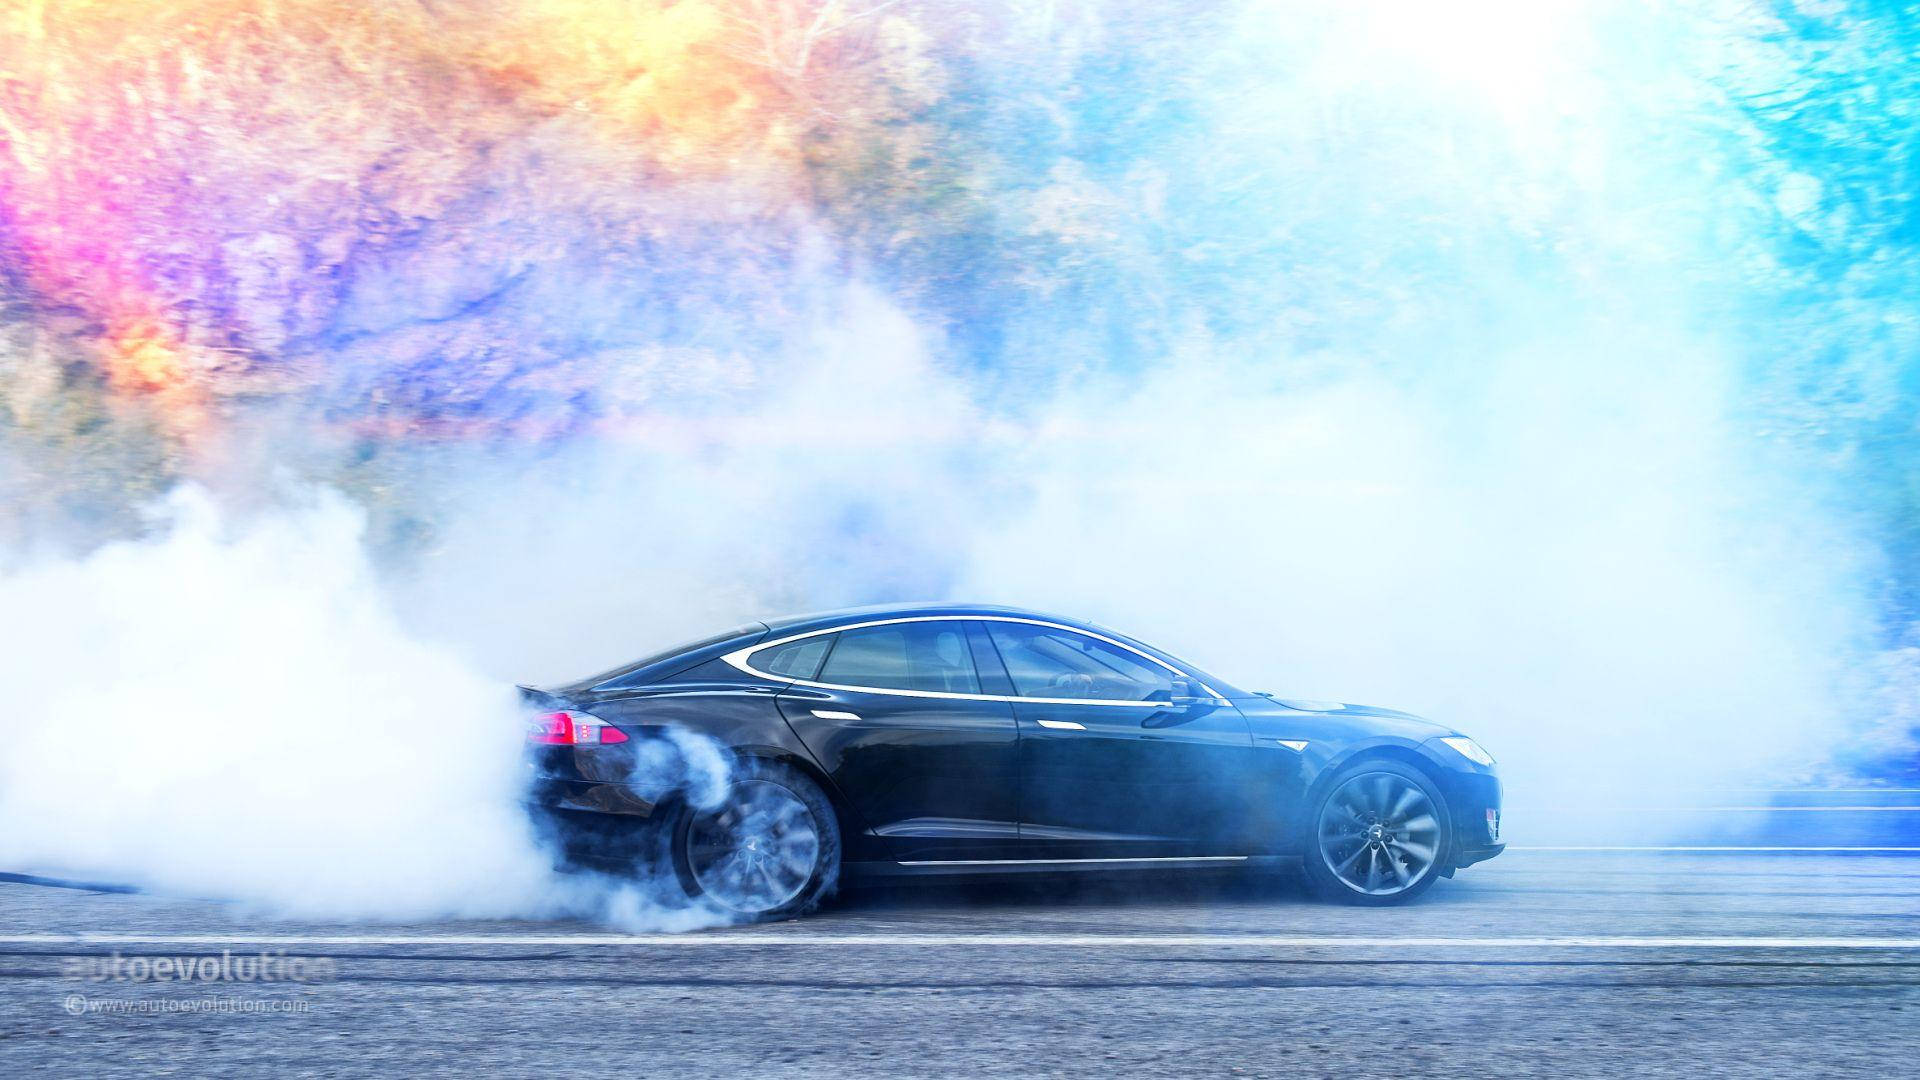 Tesla 1920X1080 Wallpaper and Background Image